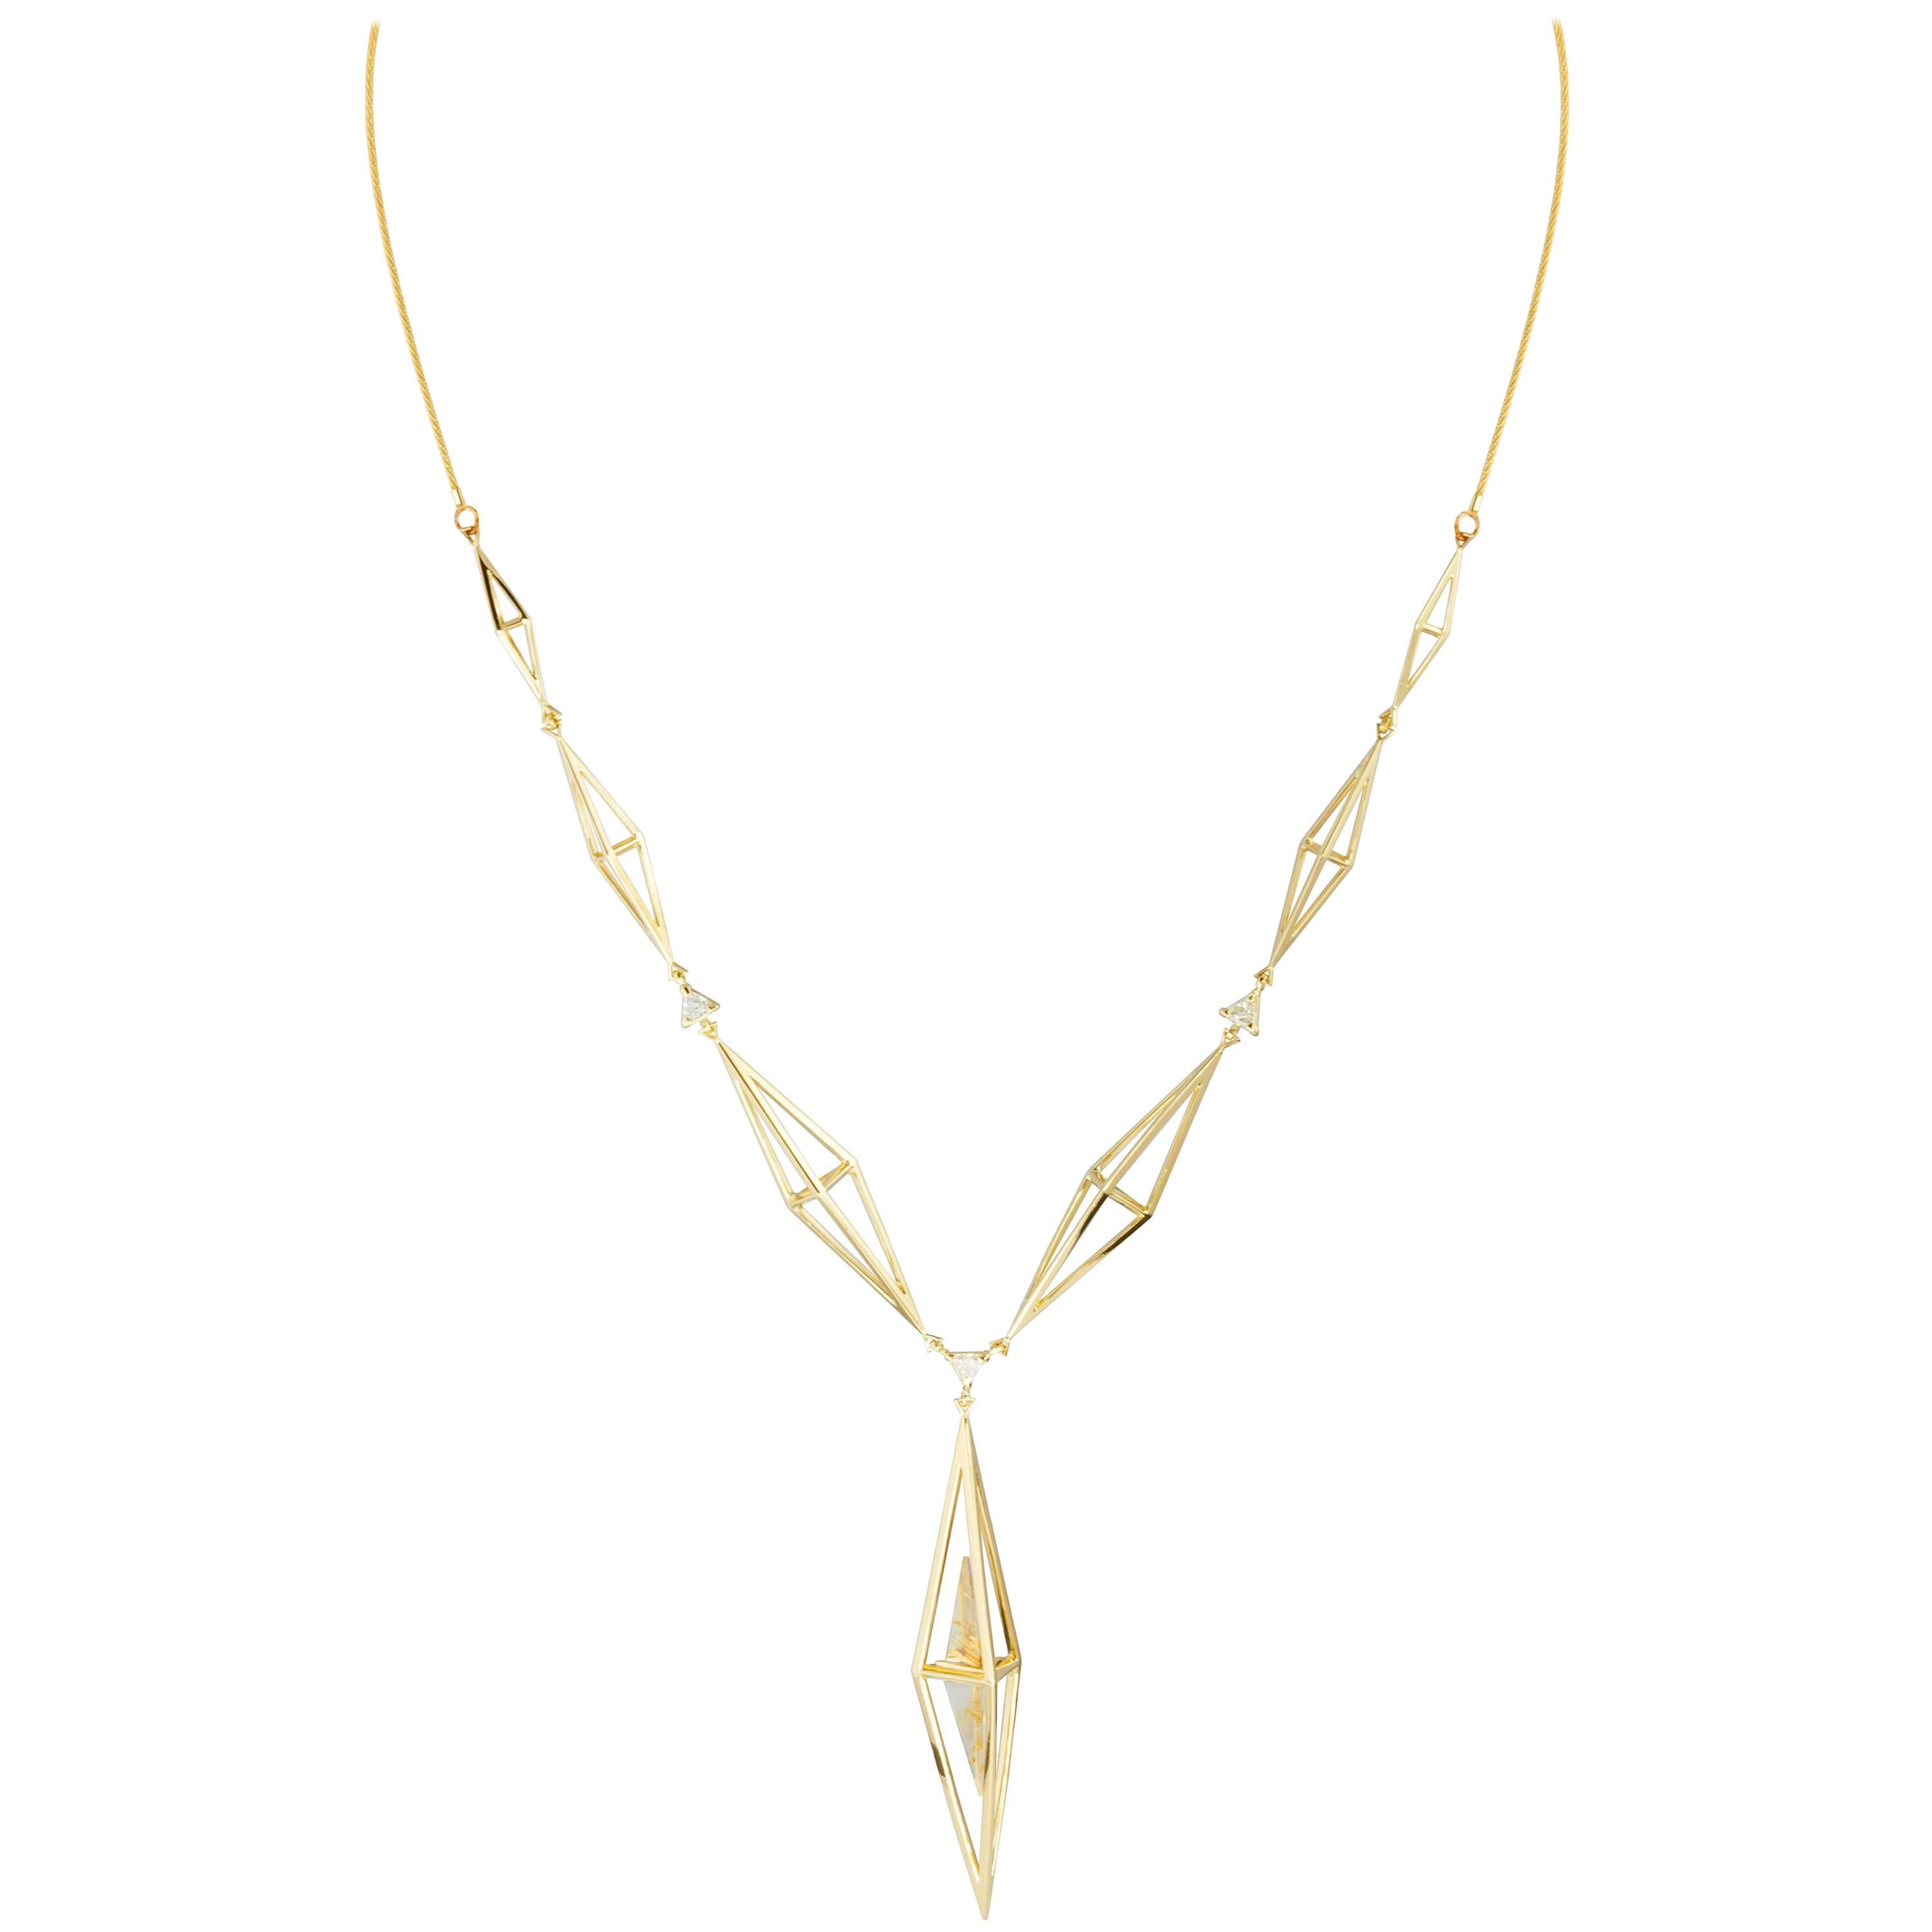 Tetrahedron Necklace 18K Yellow Gold  &  Rutilated Quartz and Diamonds by Kattri For Sale